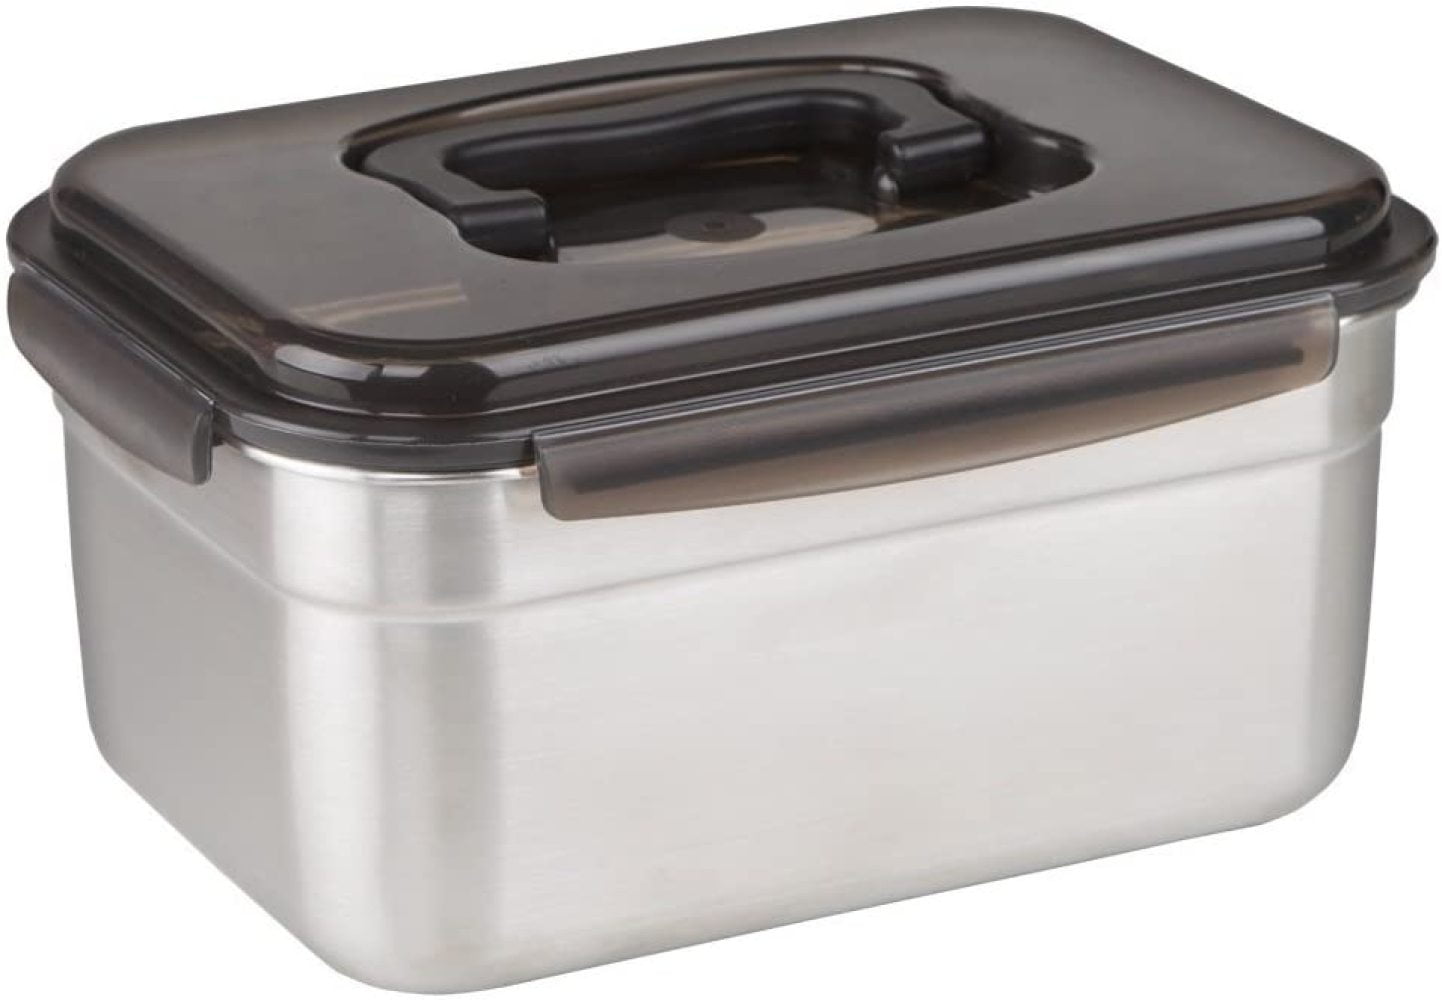 All Stainless Steel Airtight Premium Food Storage Container Made in Korea 